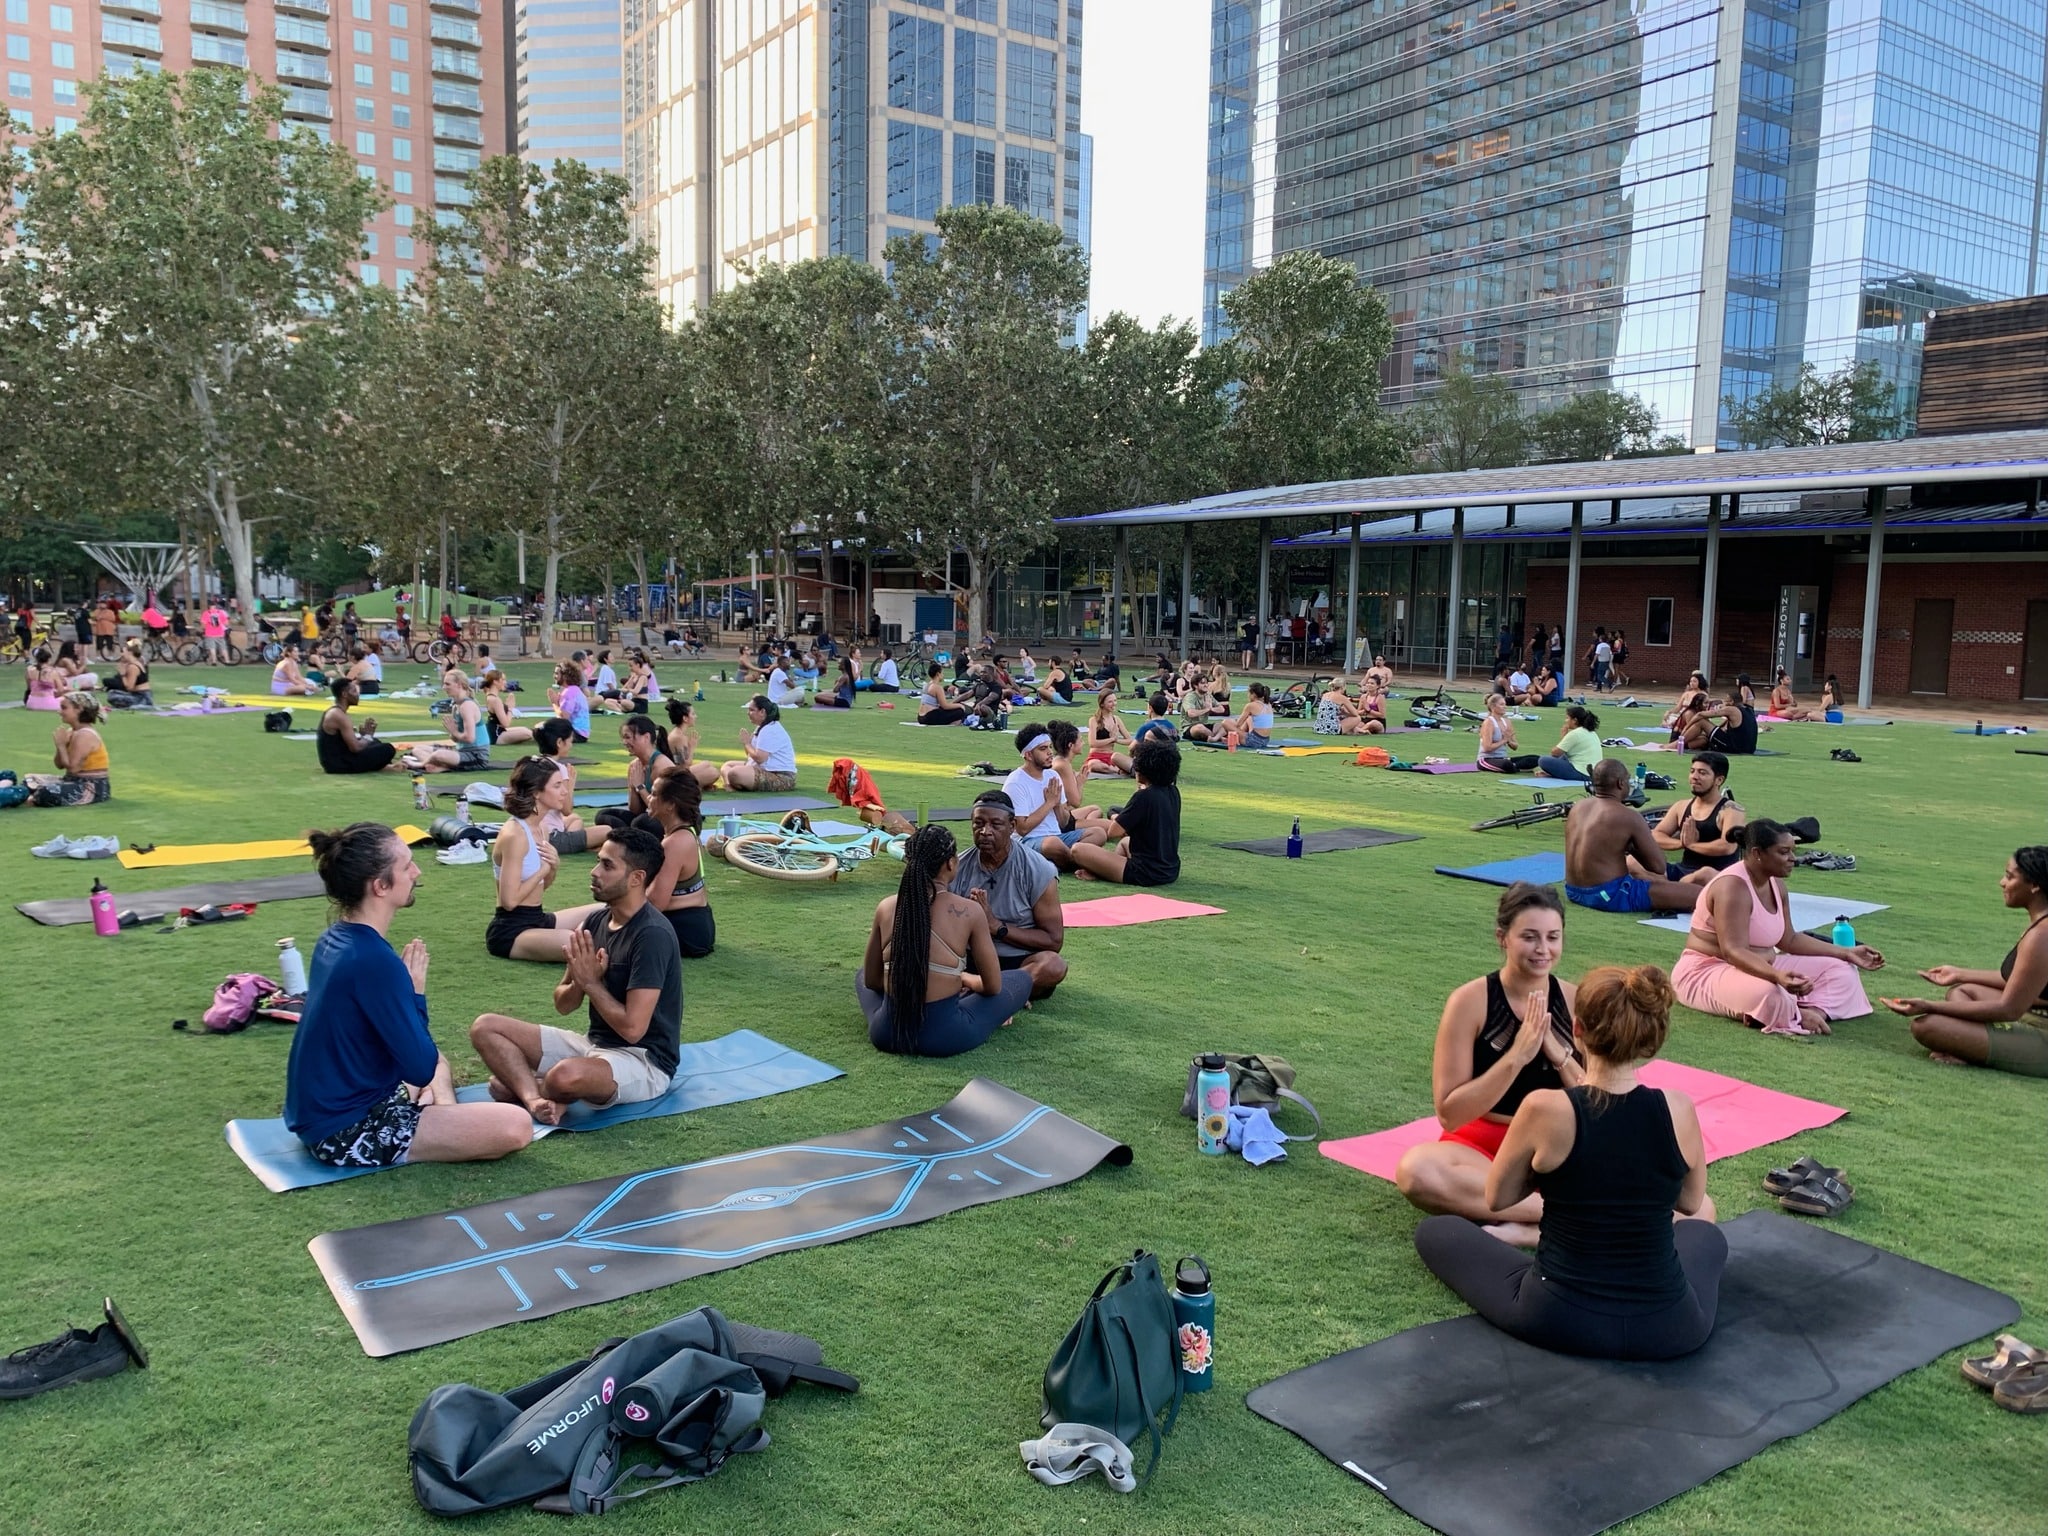 Yoga class on the green Jones lawn at Discovery Green in Downtown Houston